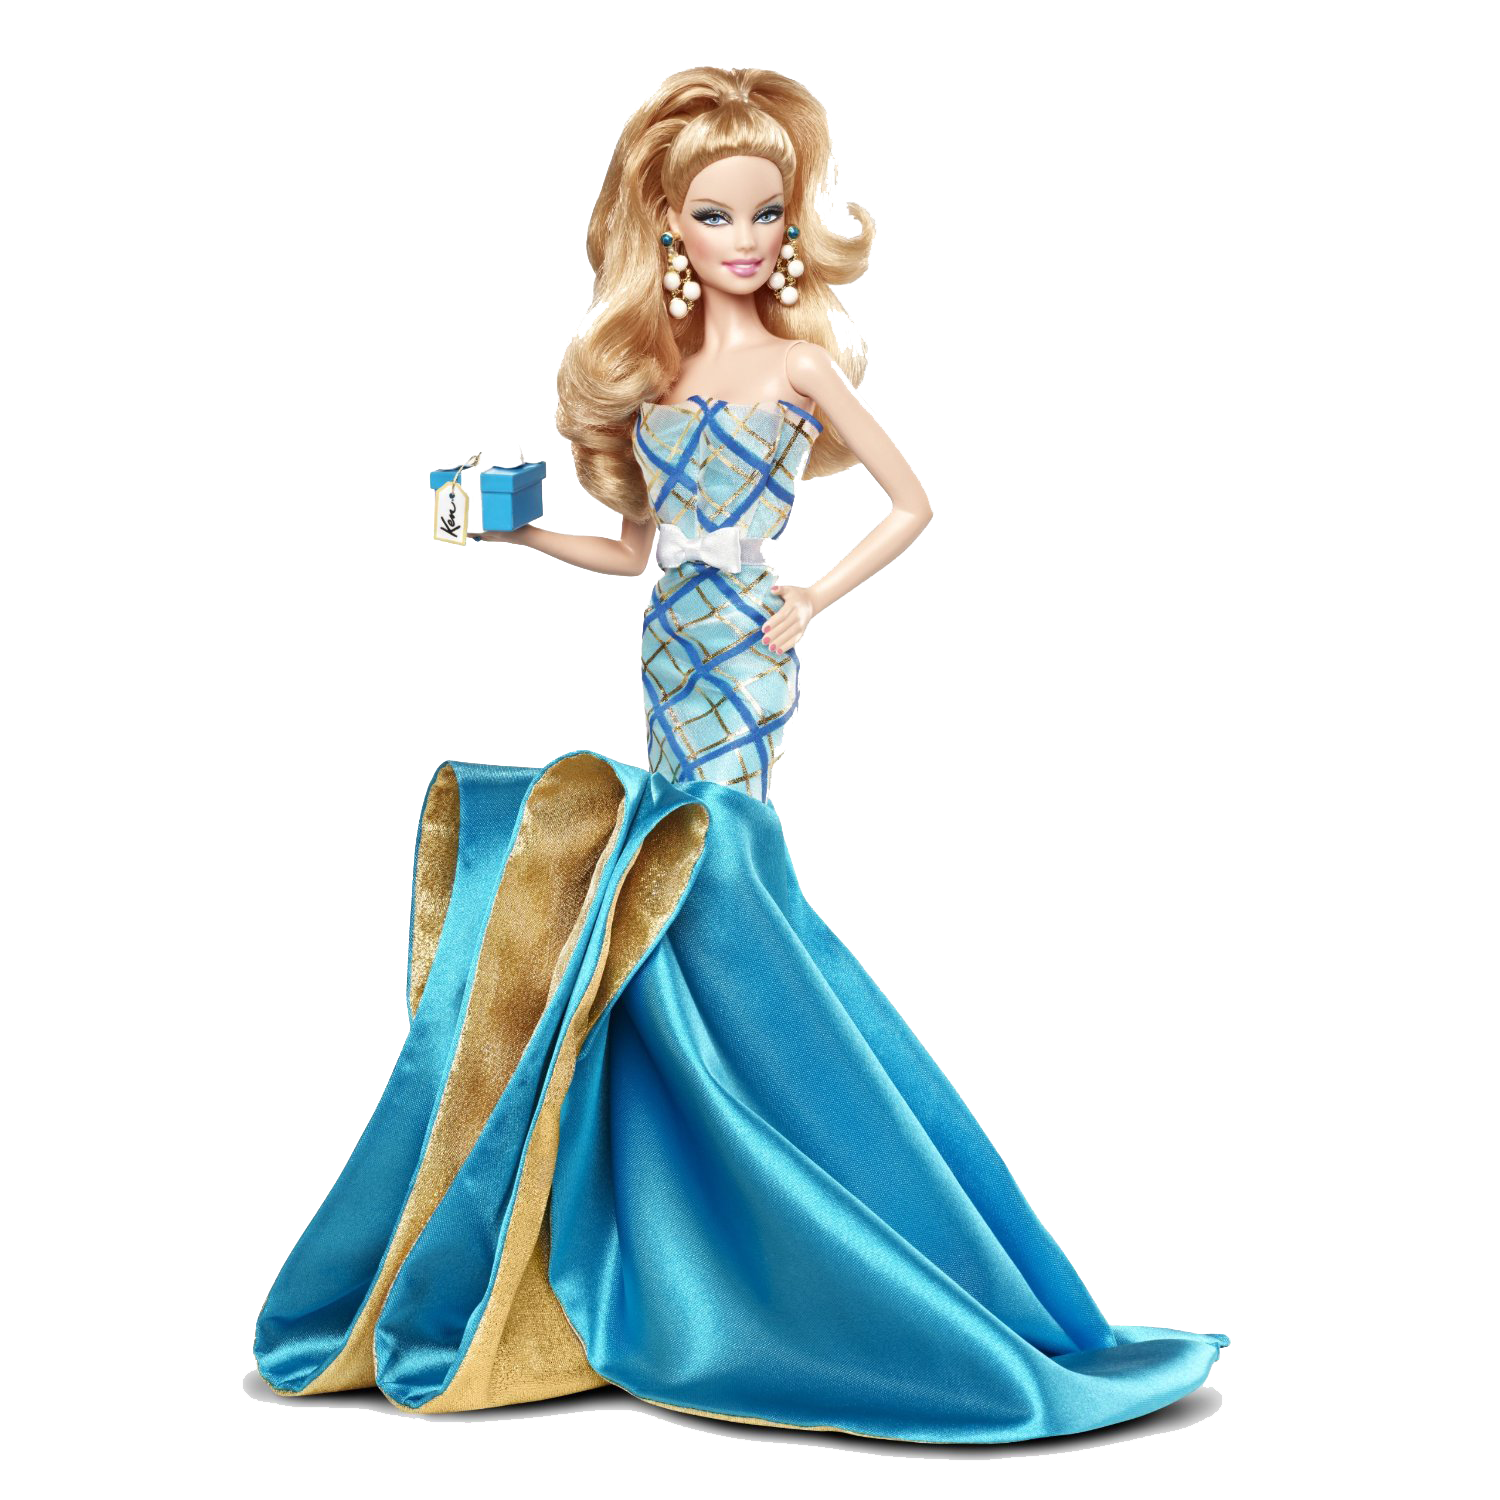 Free Barbie Doll PNG Transparent Image, Download Free Barbie Doll PNG Transparent Image png image, Free ClipArts on Clipart Library